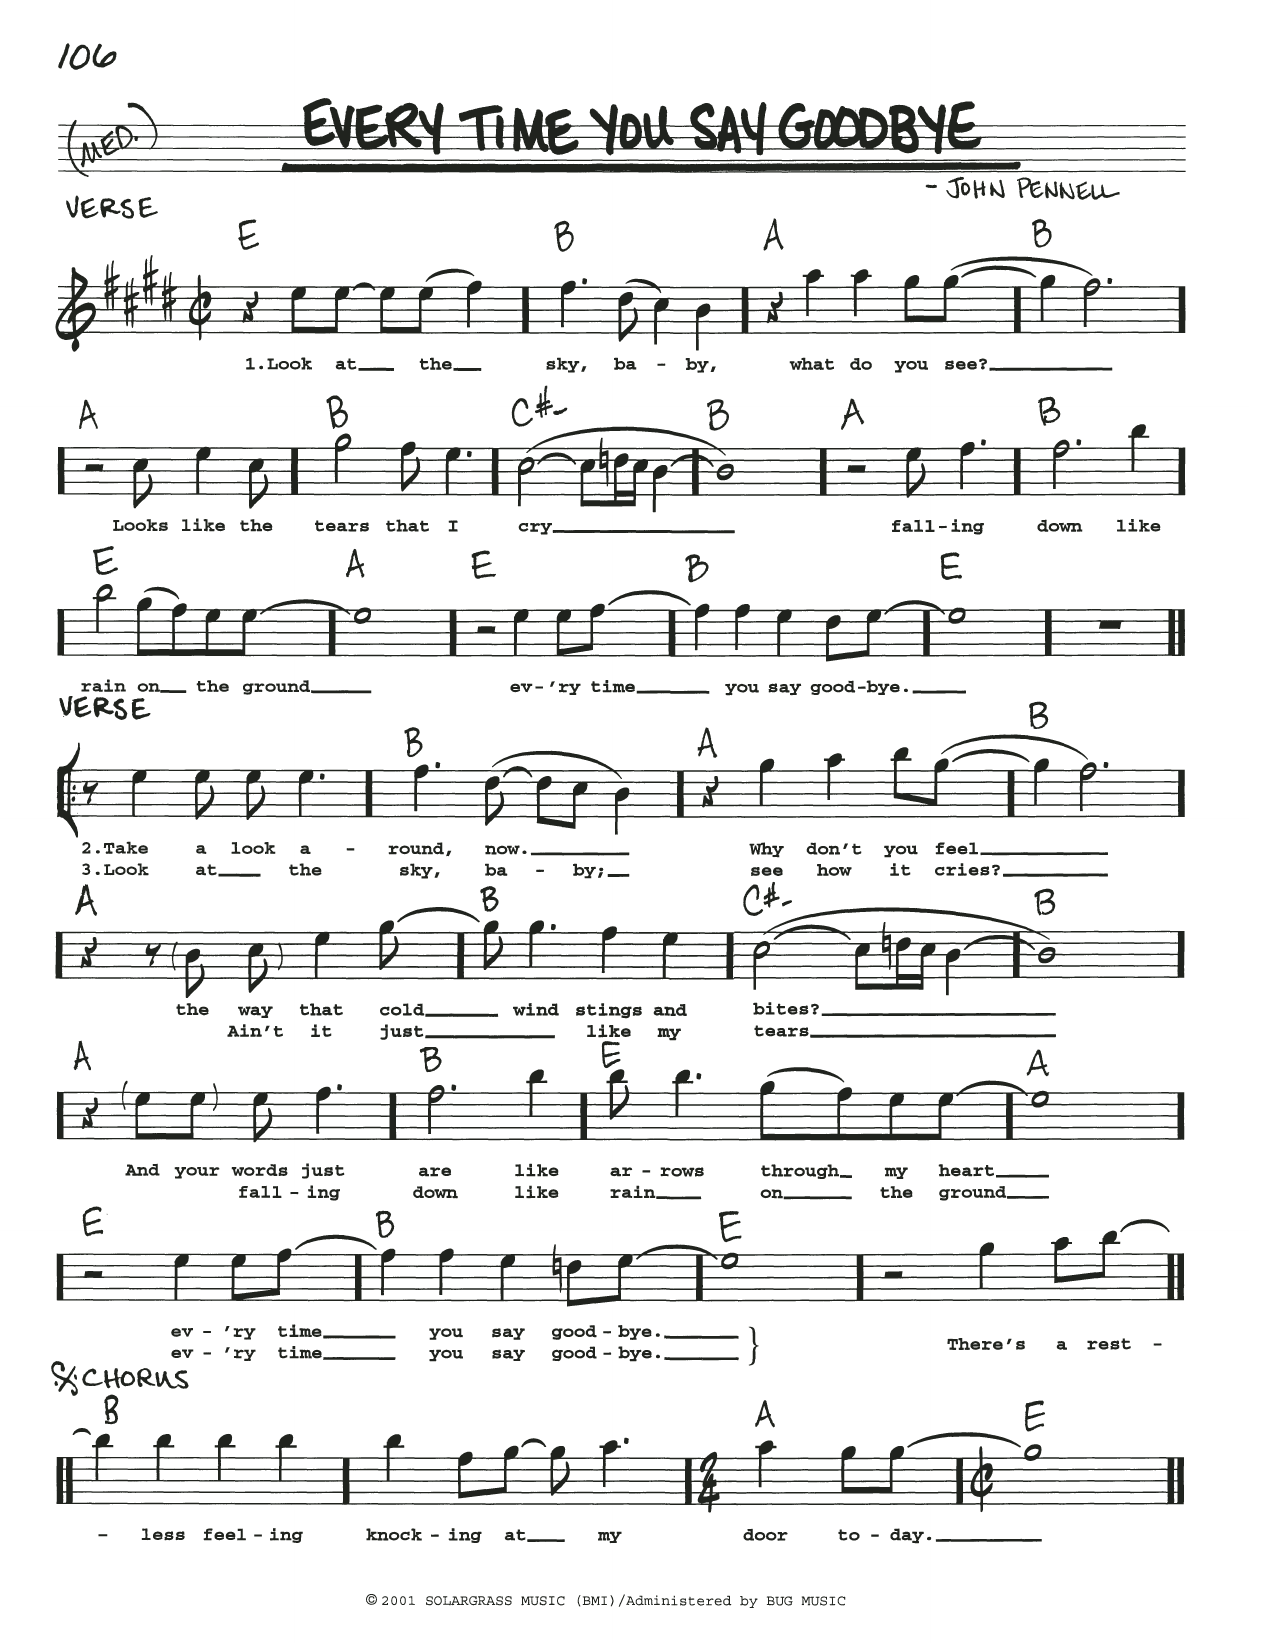 Download John Pennell Everytime You Say Goodbye Sheet Music